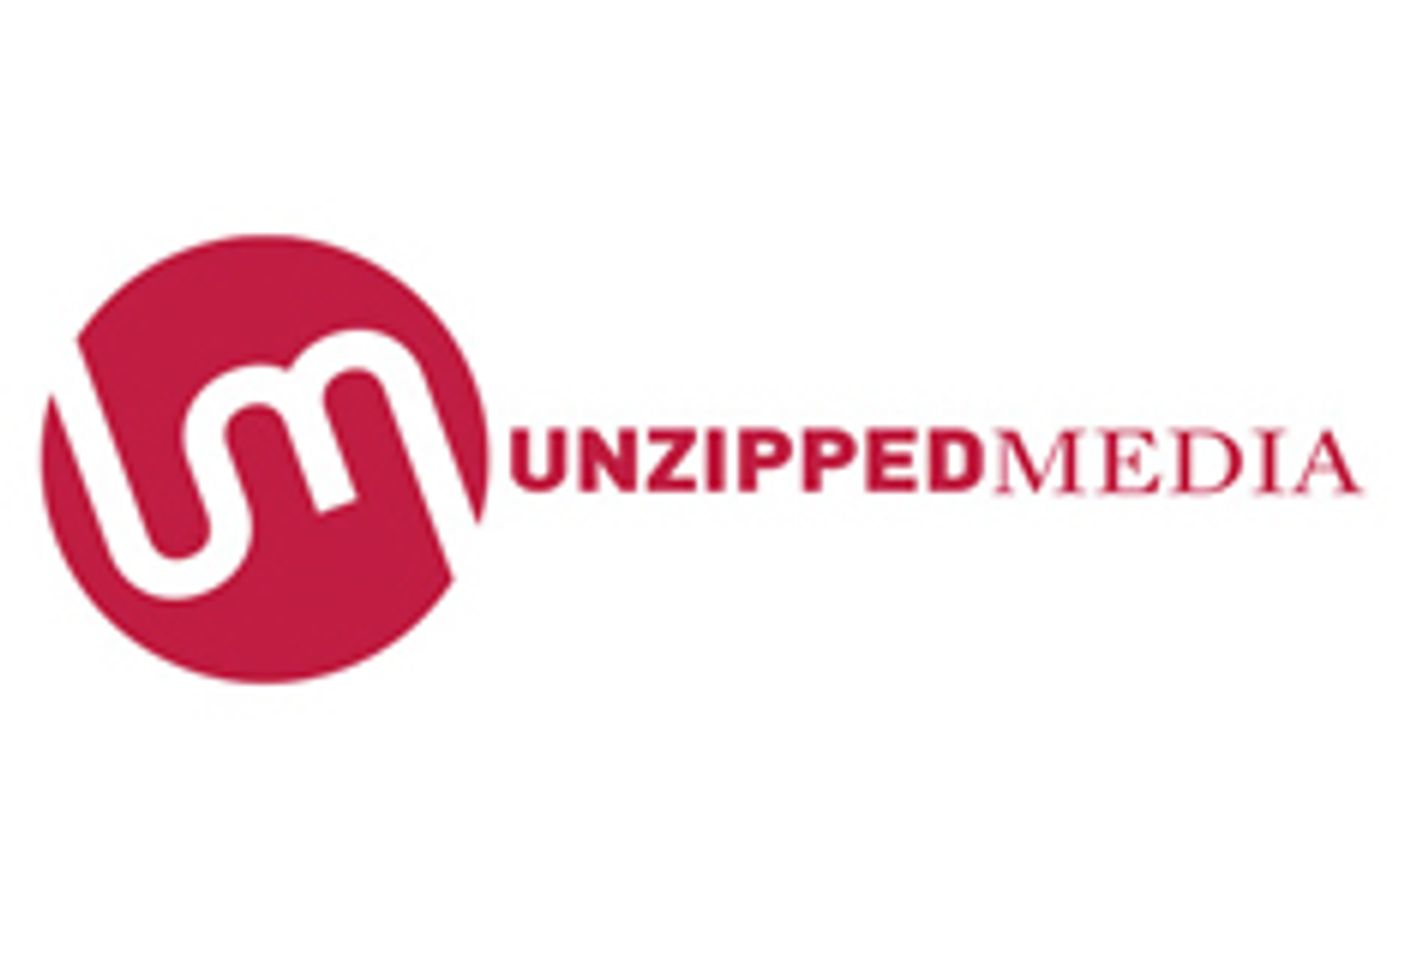 Unzipped Media Acquires GayWired.com